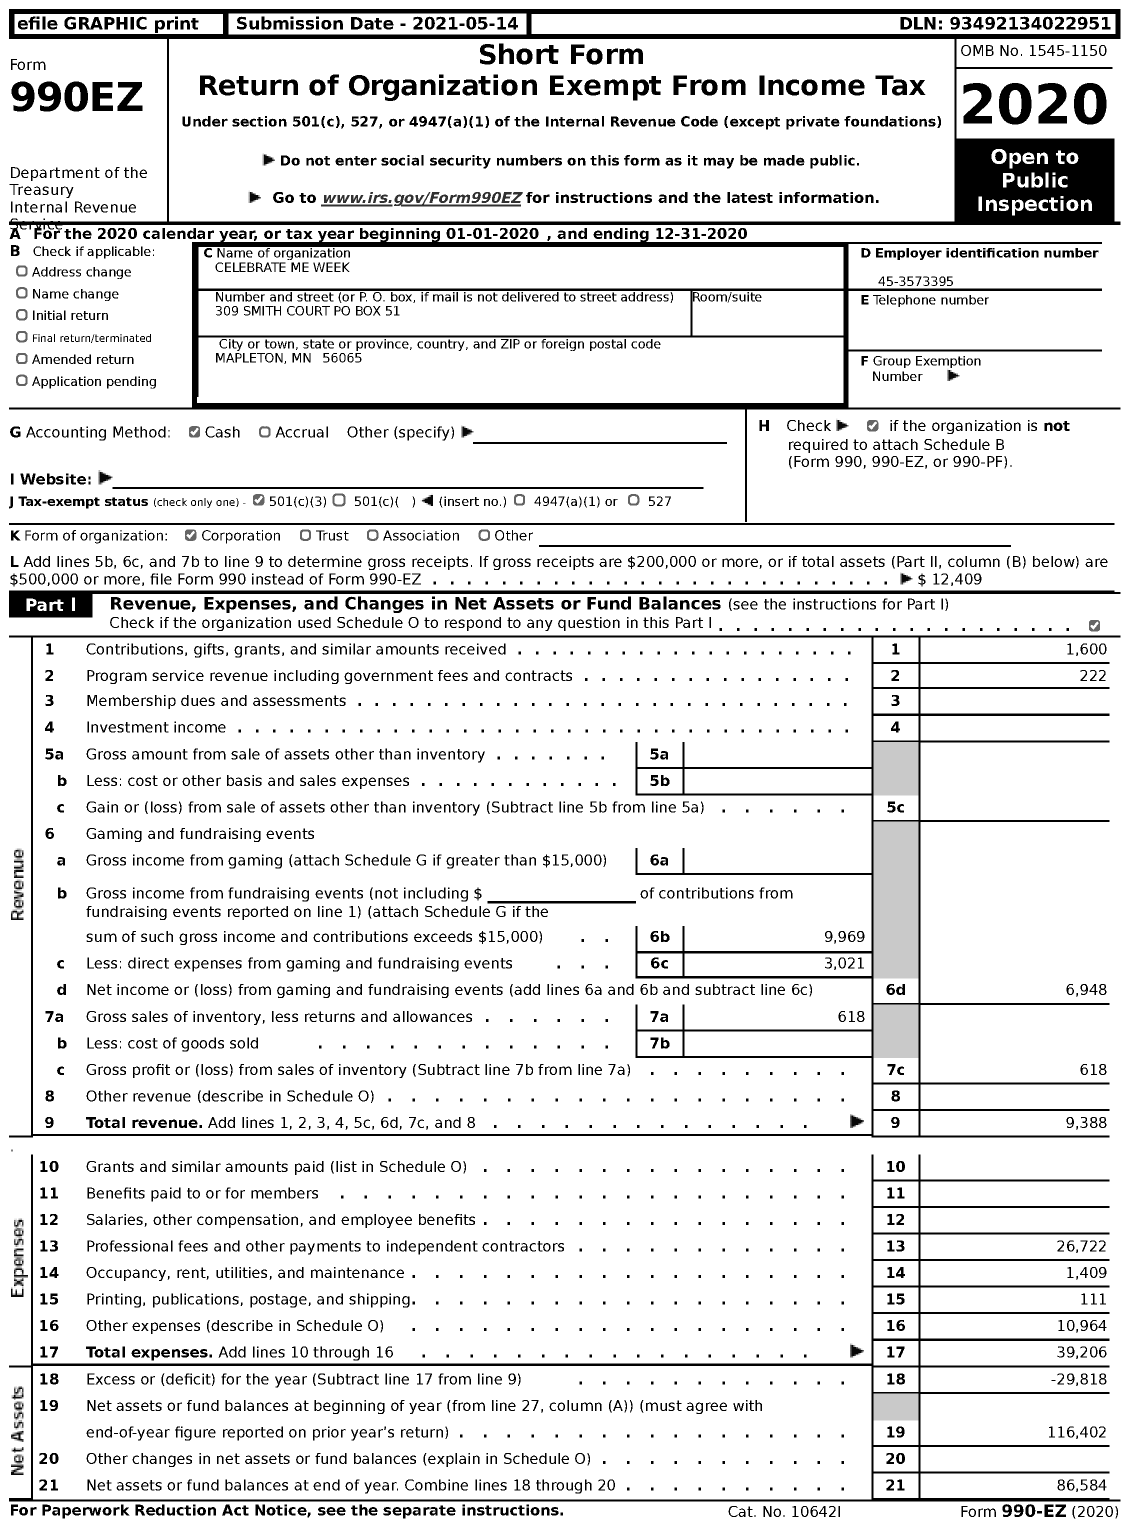 Image of first page of 2020 Form 990EZ for Celebrate Me Week